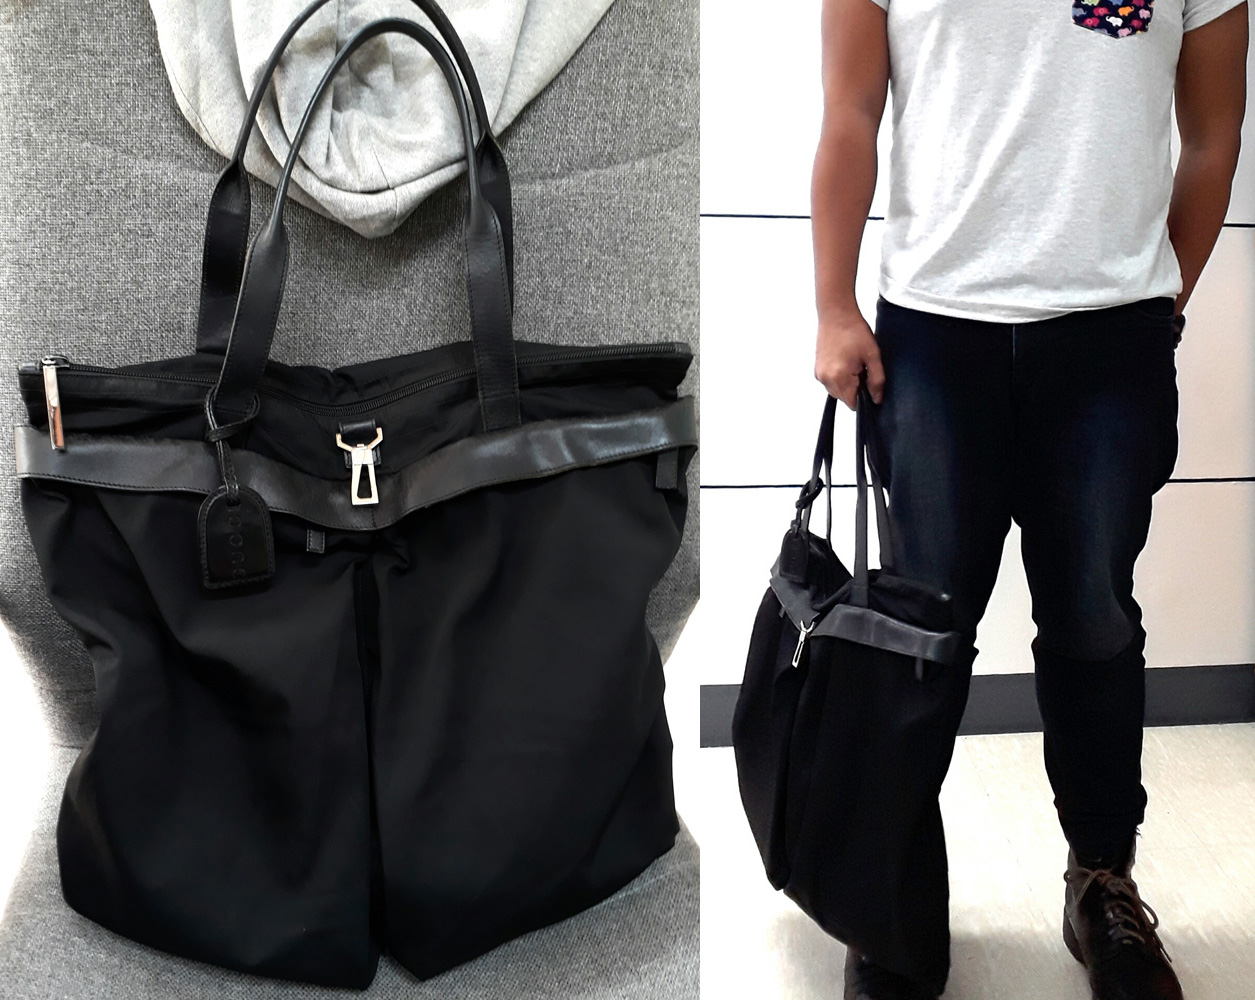 Gucci in black canvas and leather tote with silver hardware, Doc Martens 8-hole boots